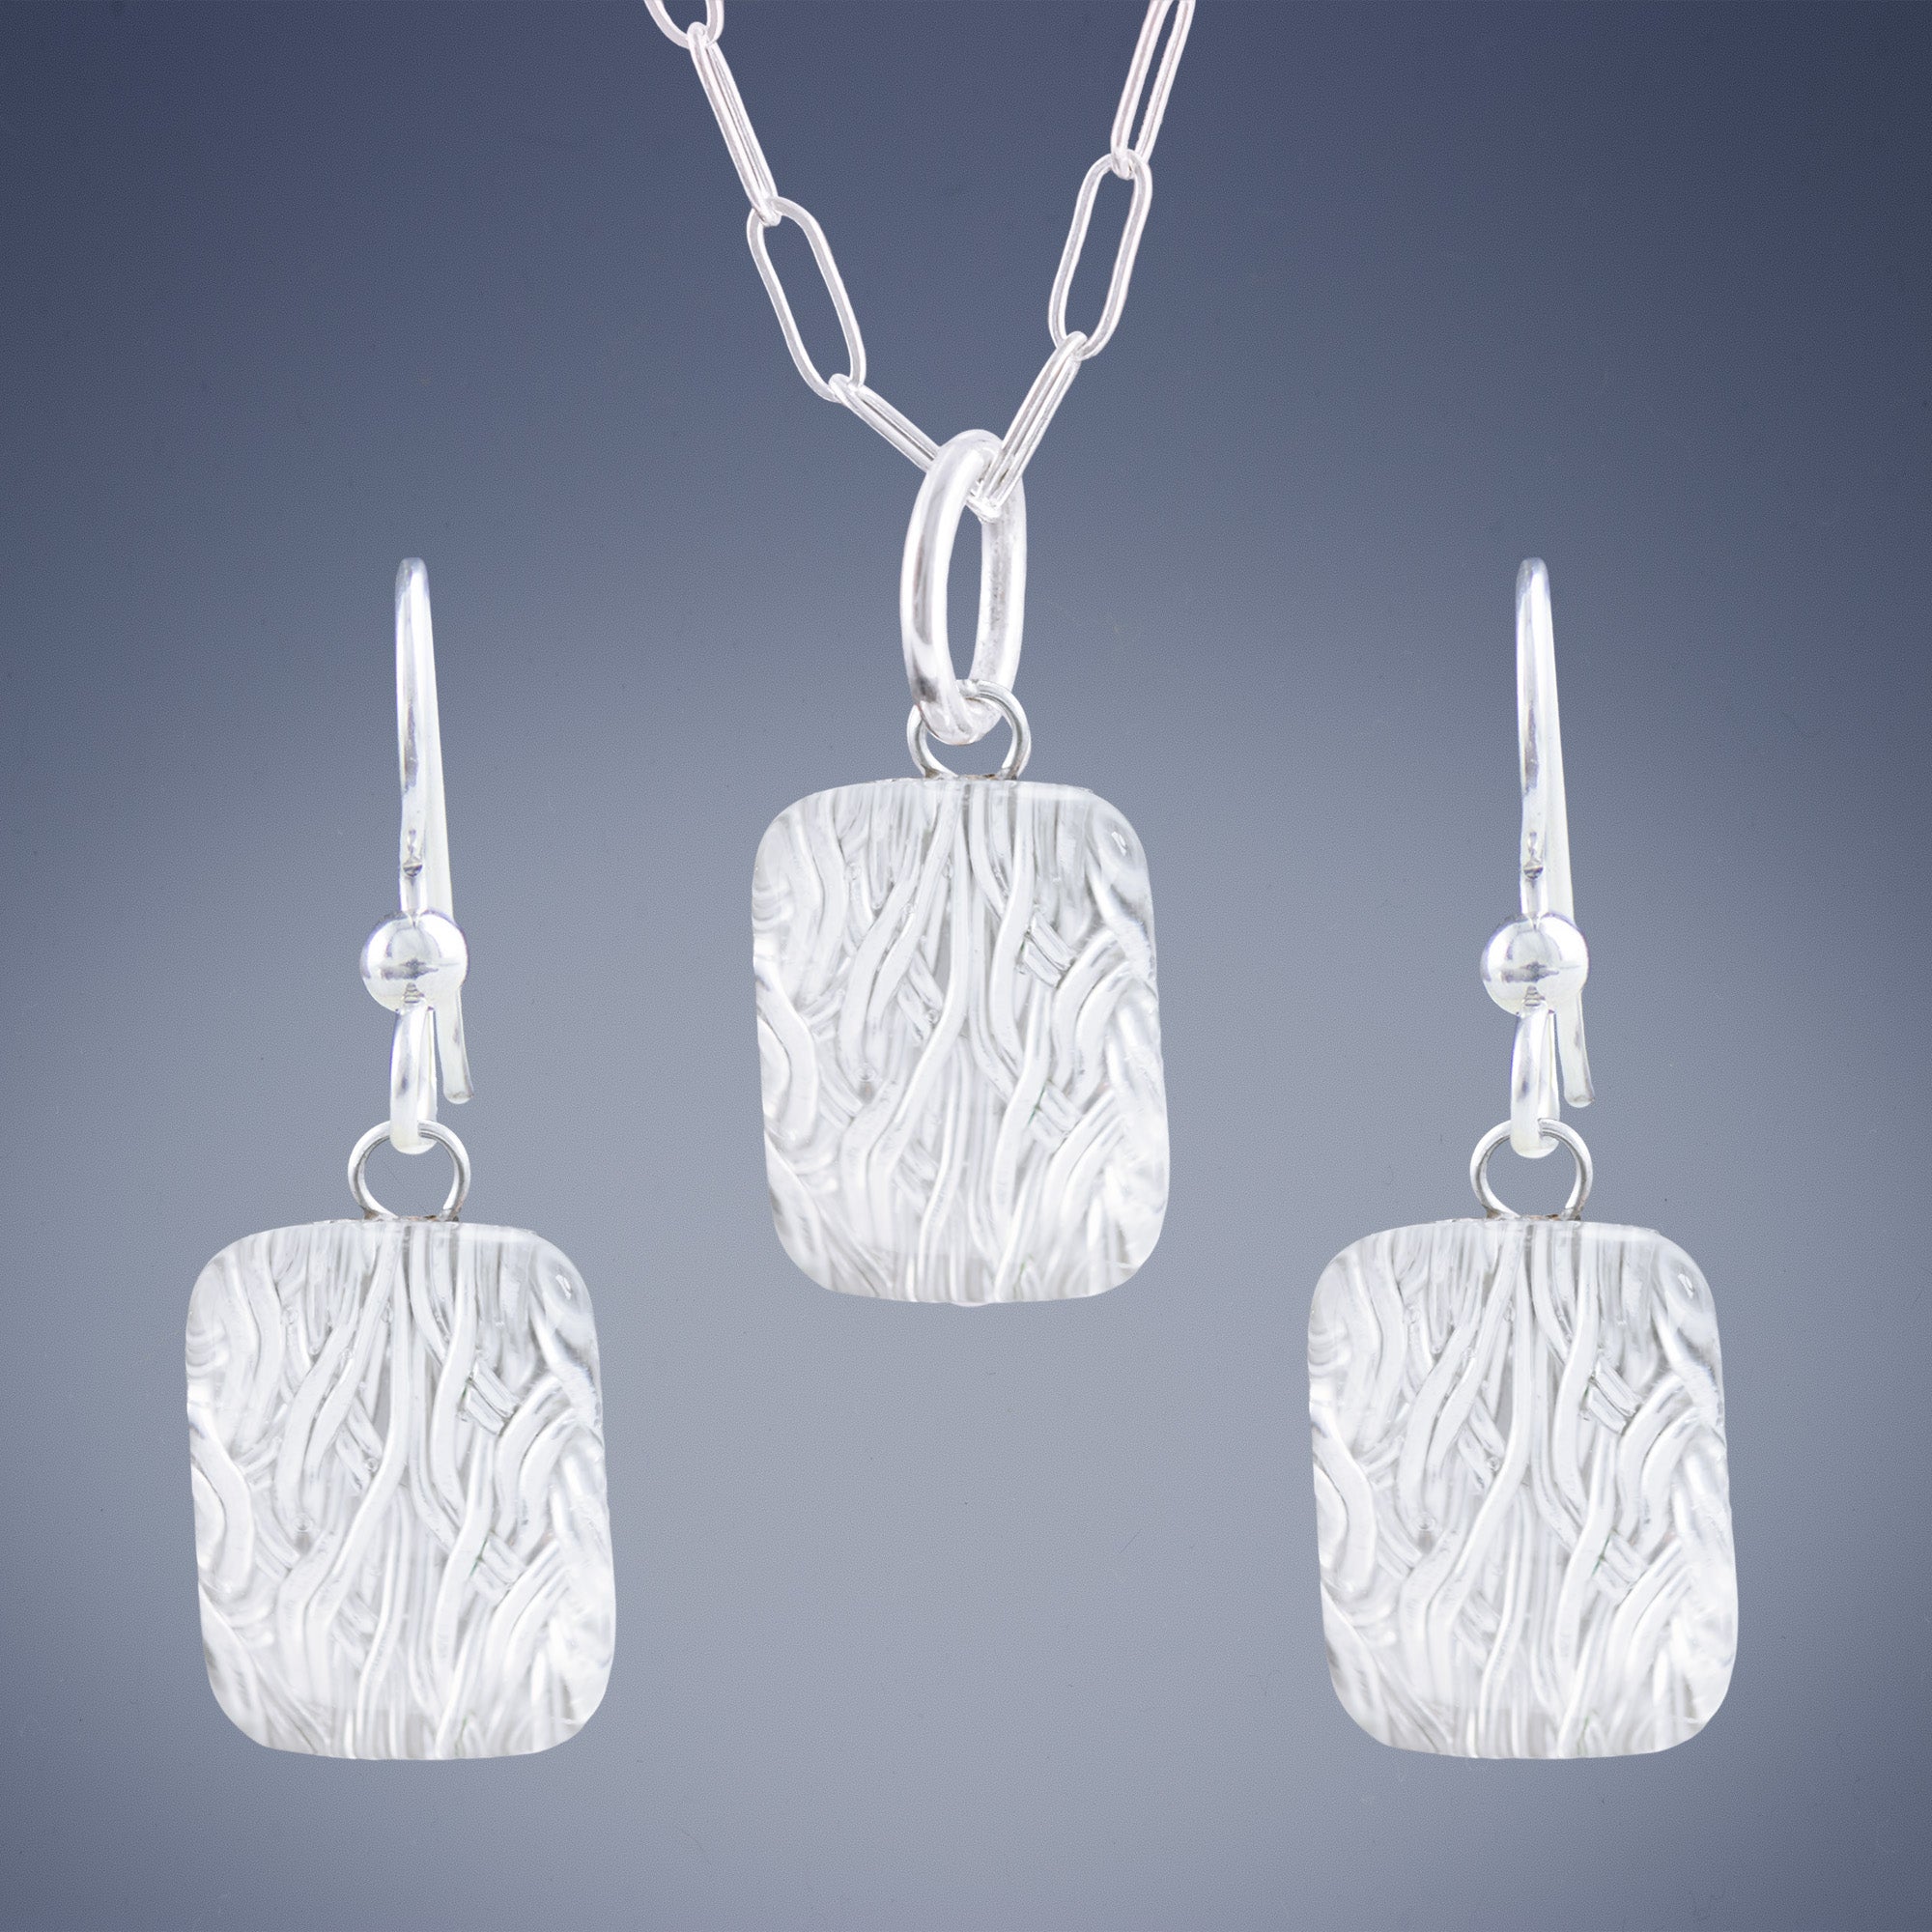 Sparkly Silver Rectangle Shaped Earring and Pendant Set with Handwoven Metal Fabric and Glass